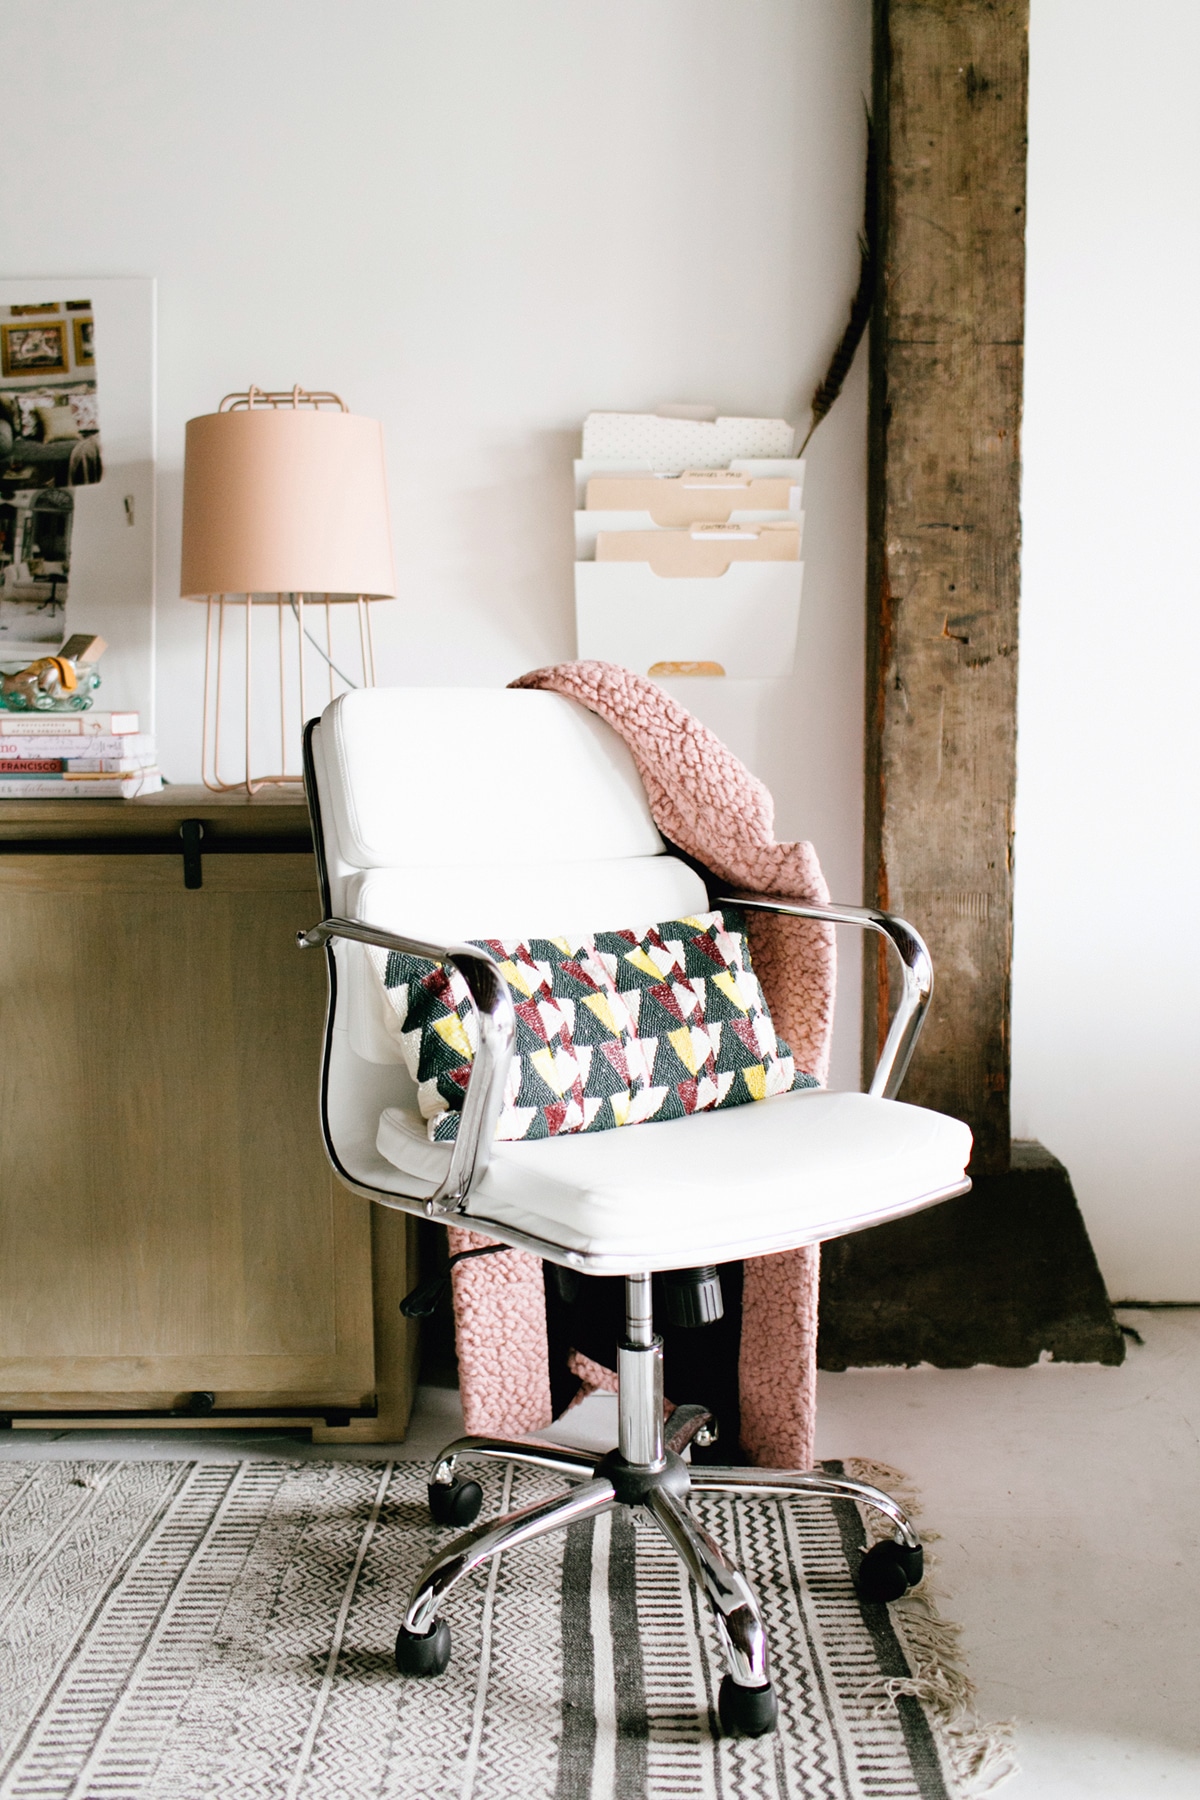 little touches bring the office style together | coco kelley georgetown seattle office